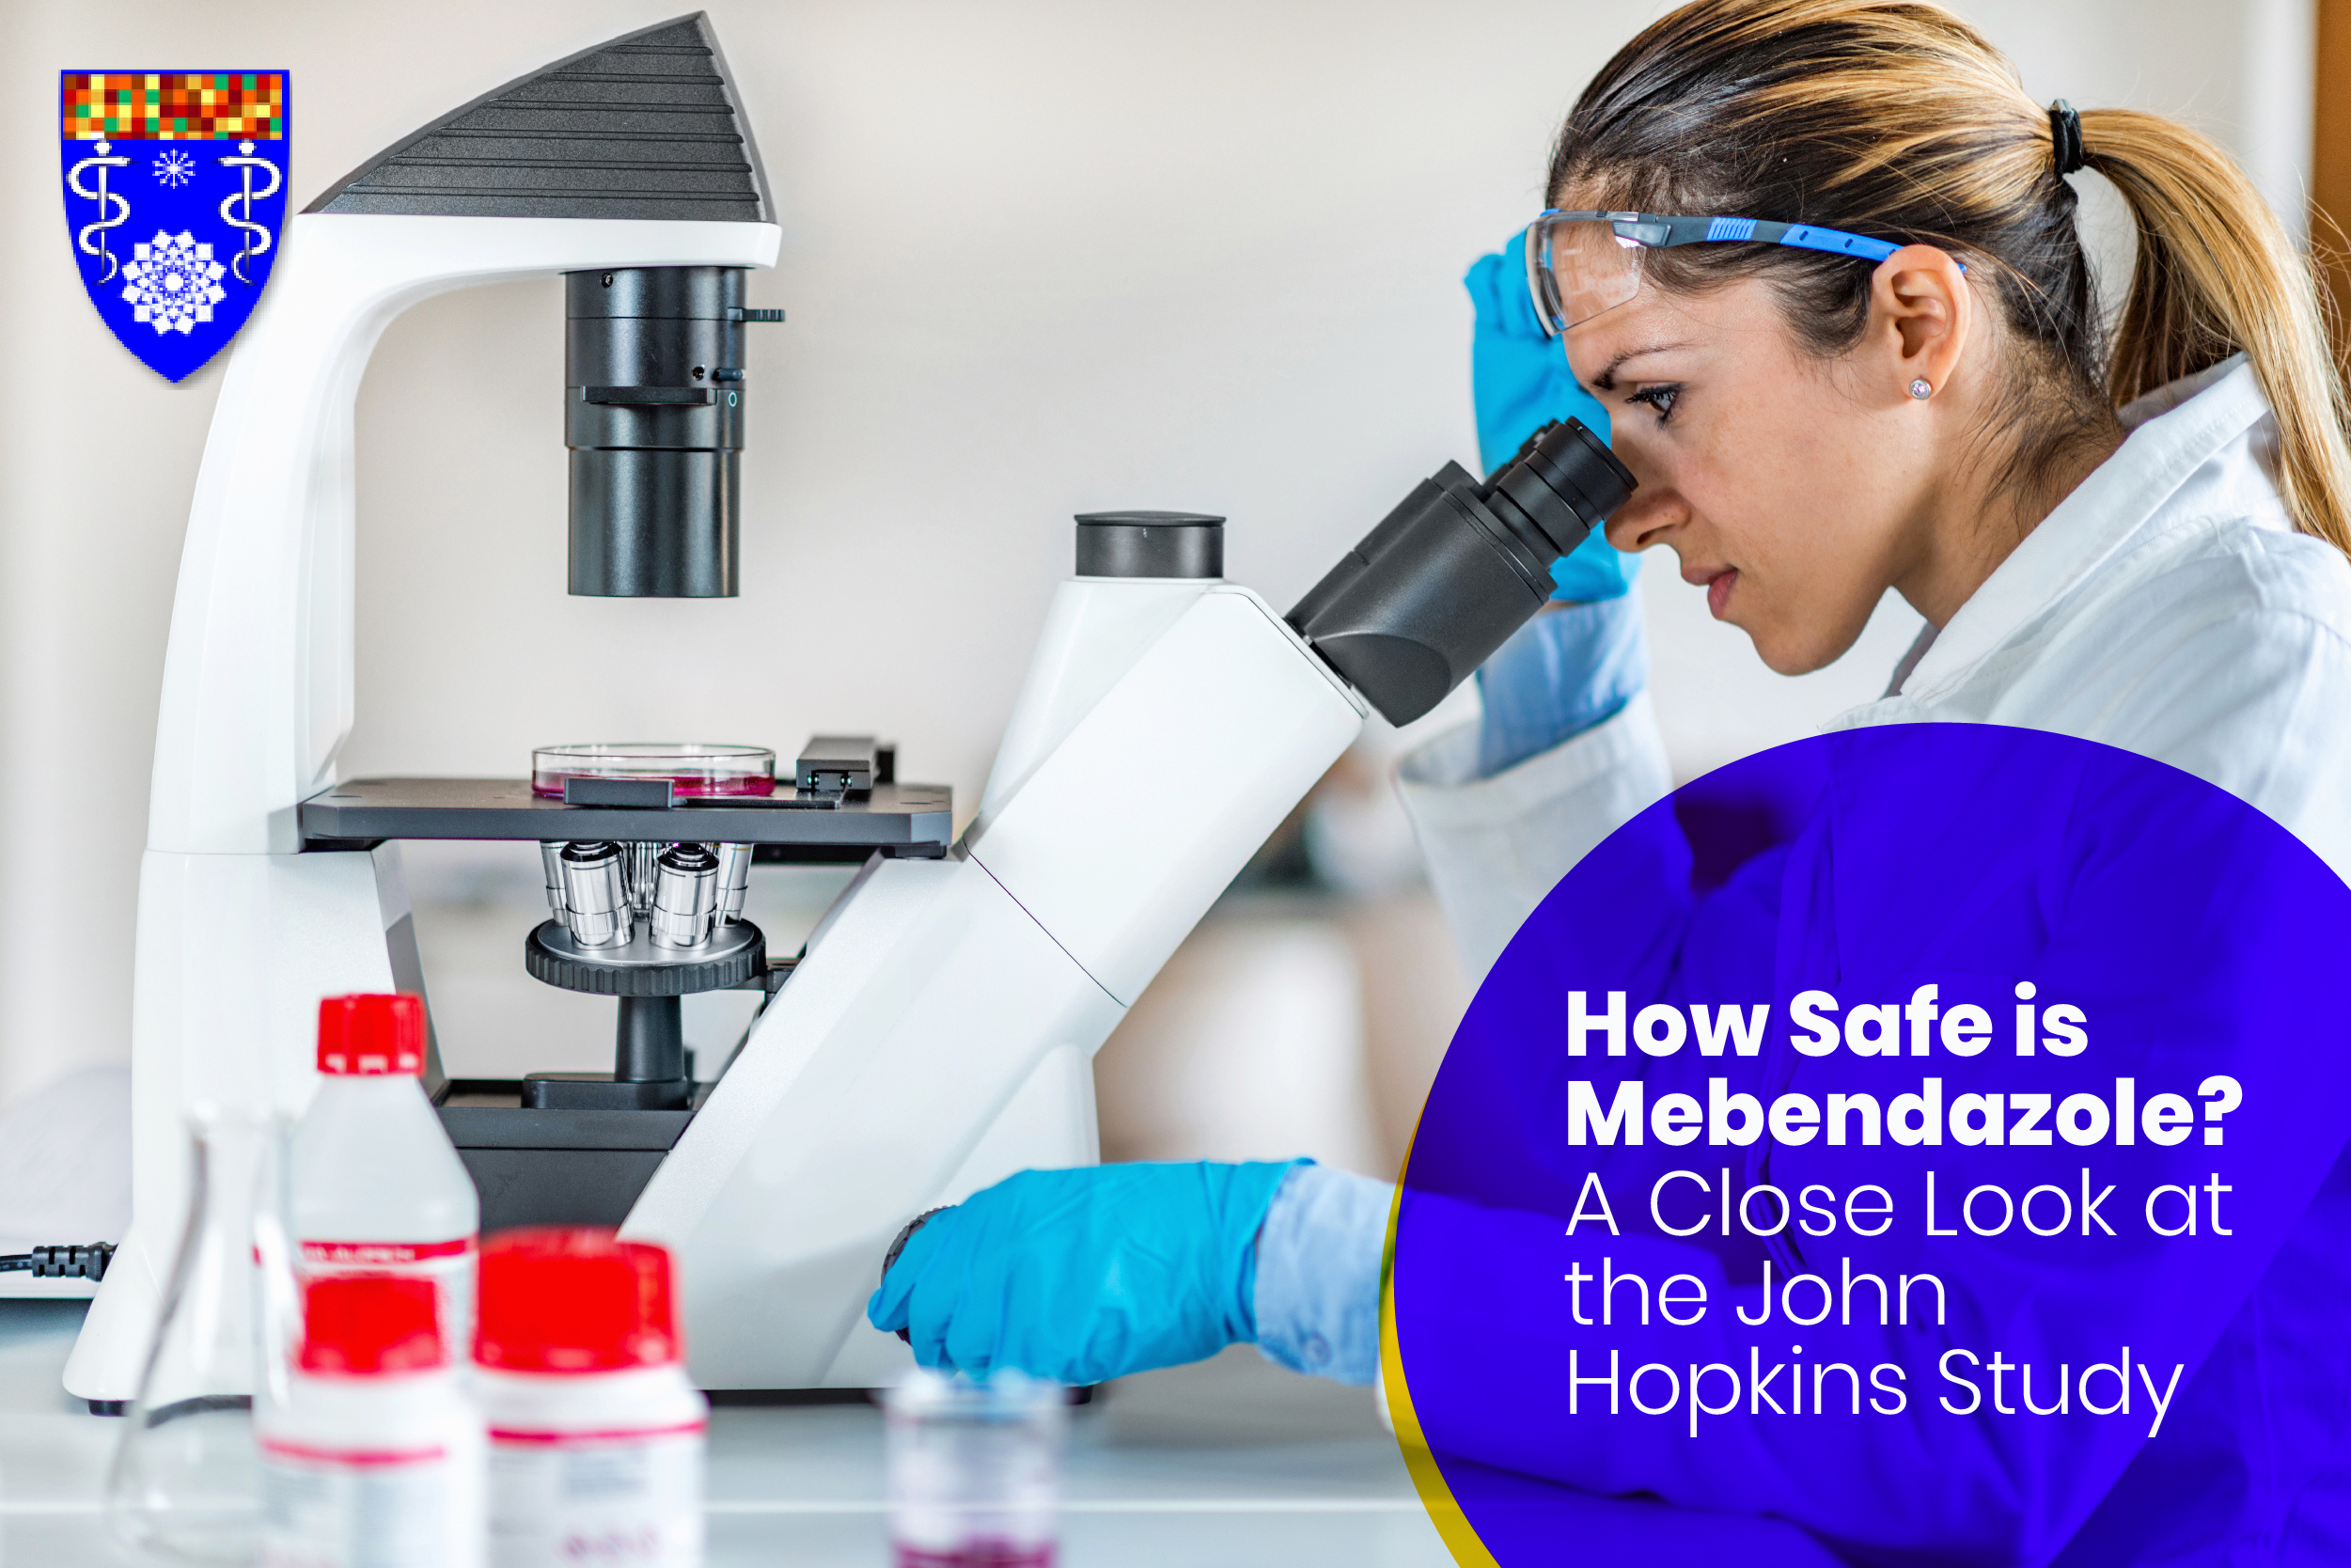 You are currently viewing How Safe is Mebendazole? A Close Look at the John Hopkins Study